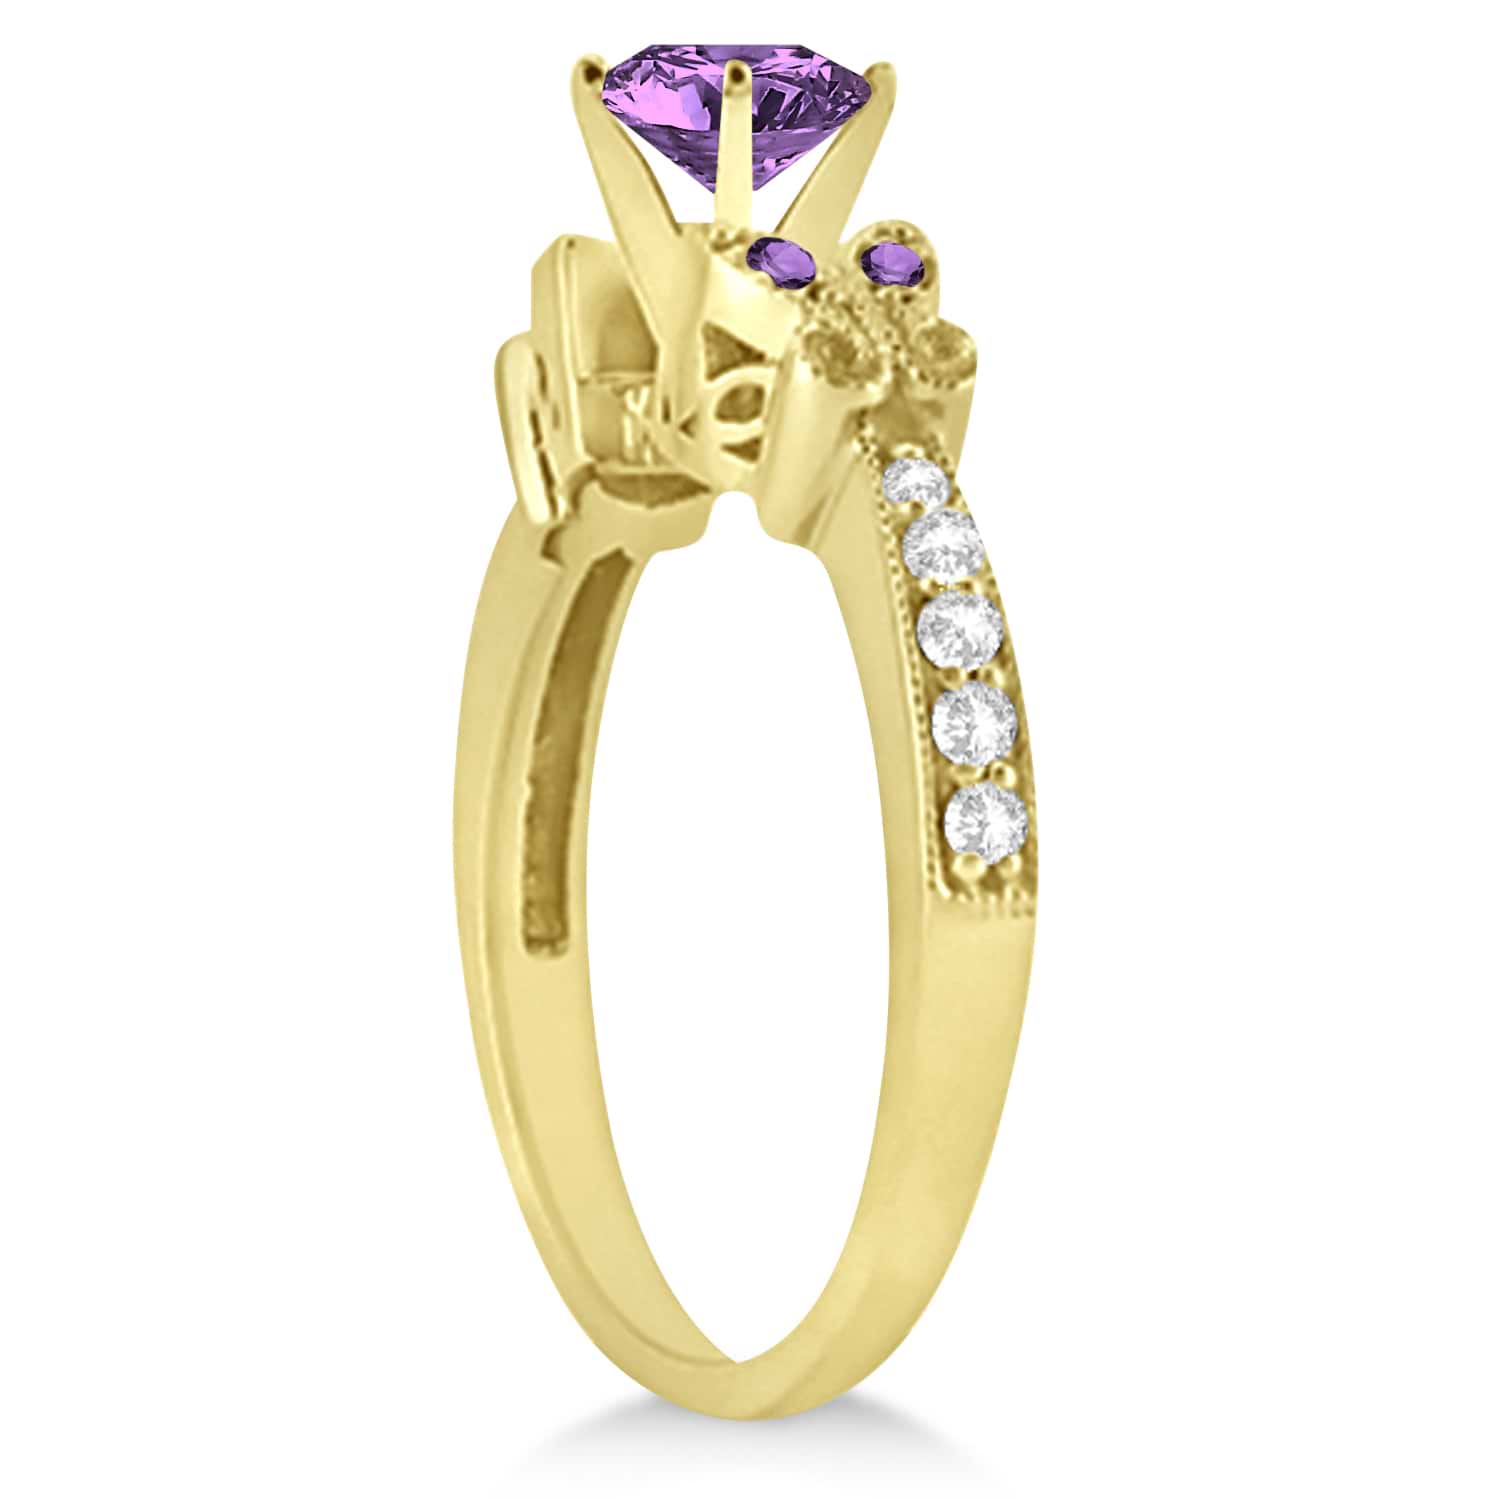 Butterfly Amethyst & Diamond Engagement Ring 18K Yellow Gold 1.28ctw